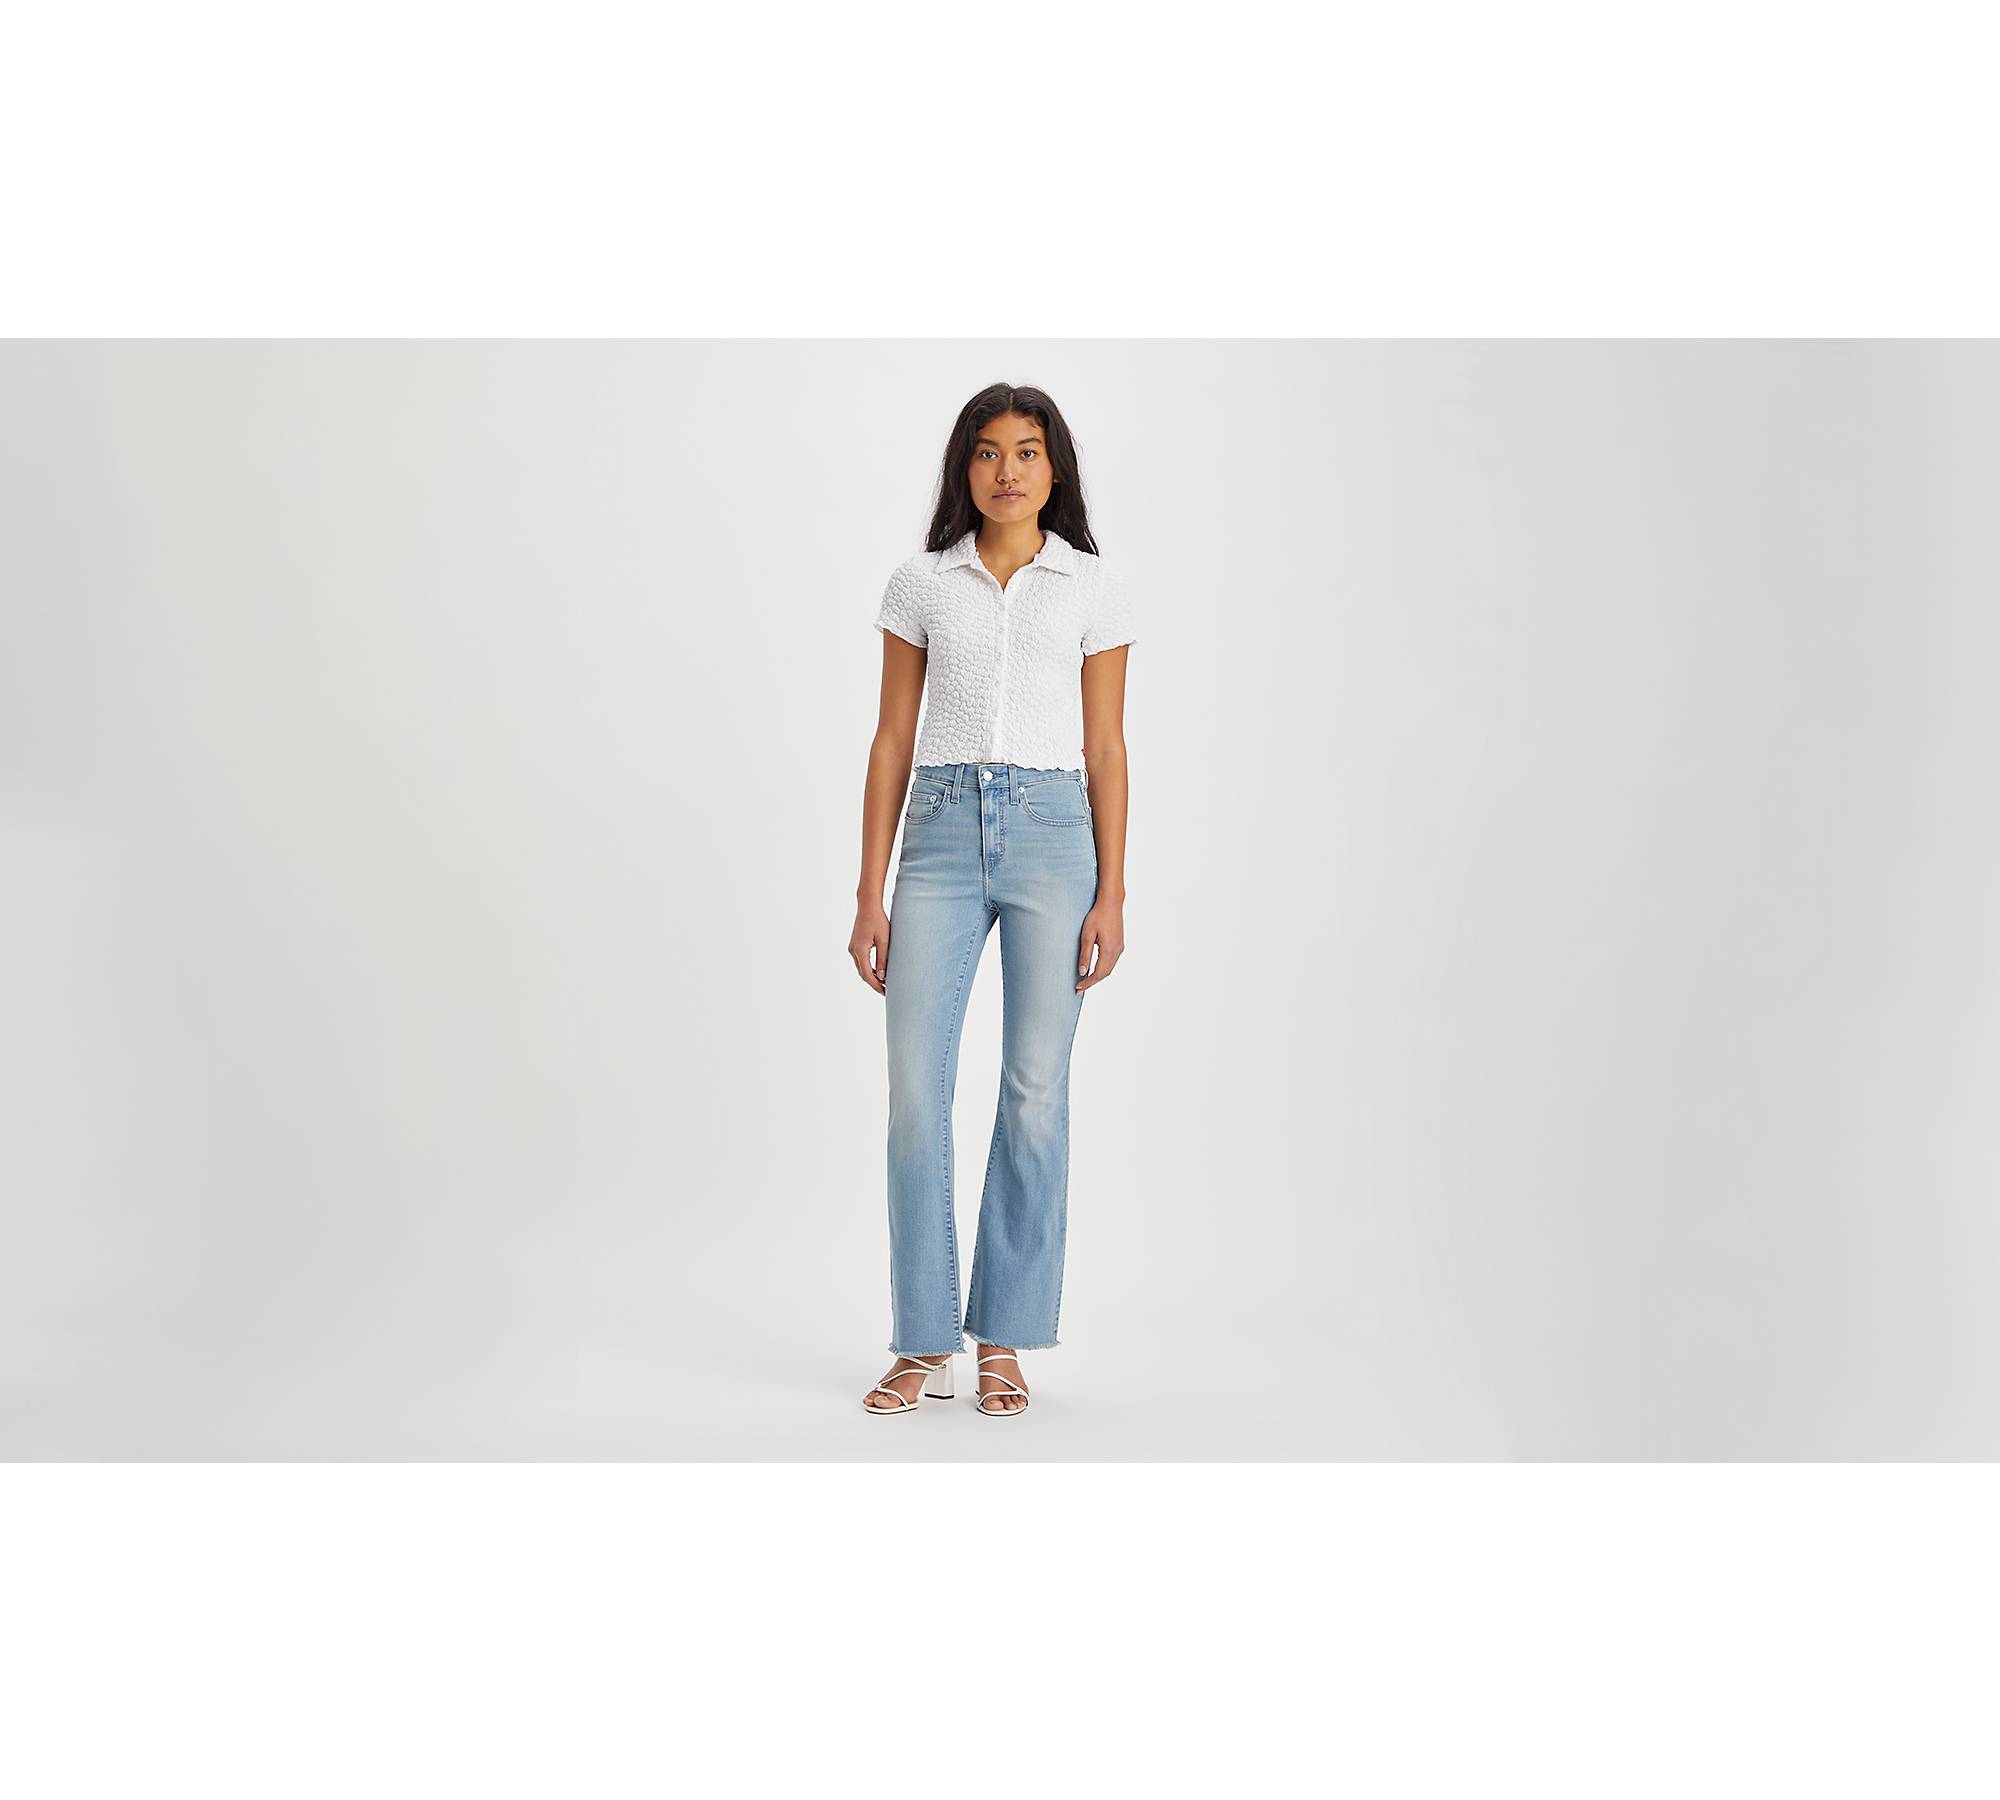 Signature by Levi Strauss & Co. Women's and Women's Plus Heritage High Rise  Flare Jeans 